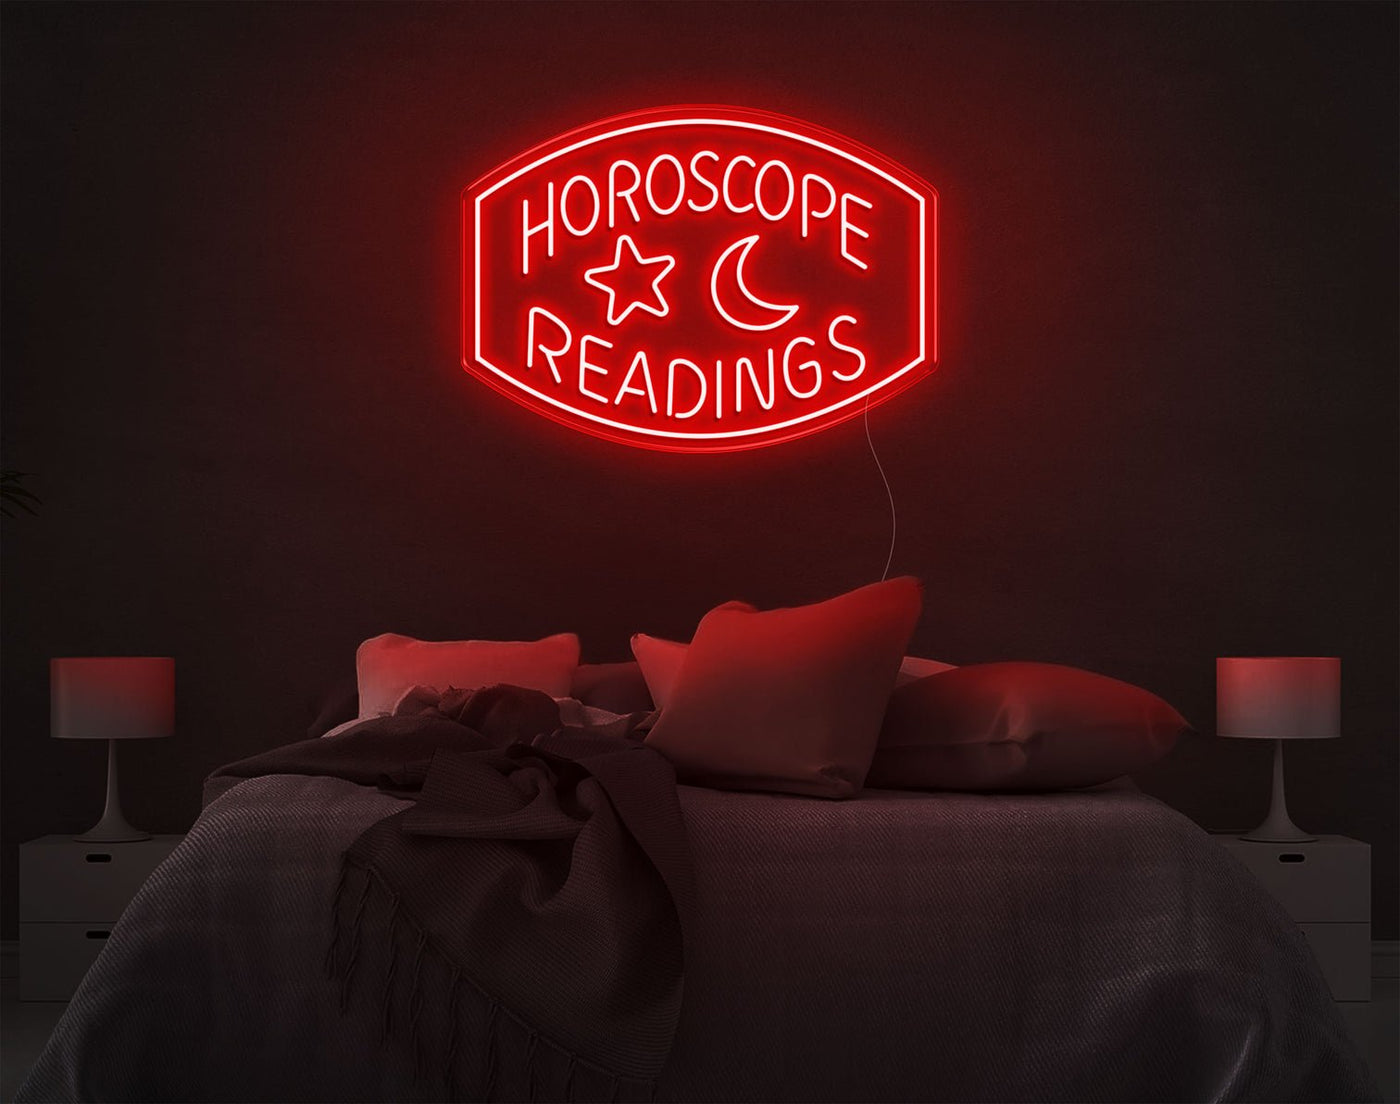 Horoscope Readings LED Neon Sign - 20inch x 28inchRed